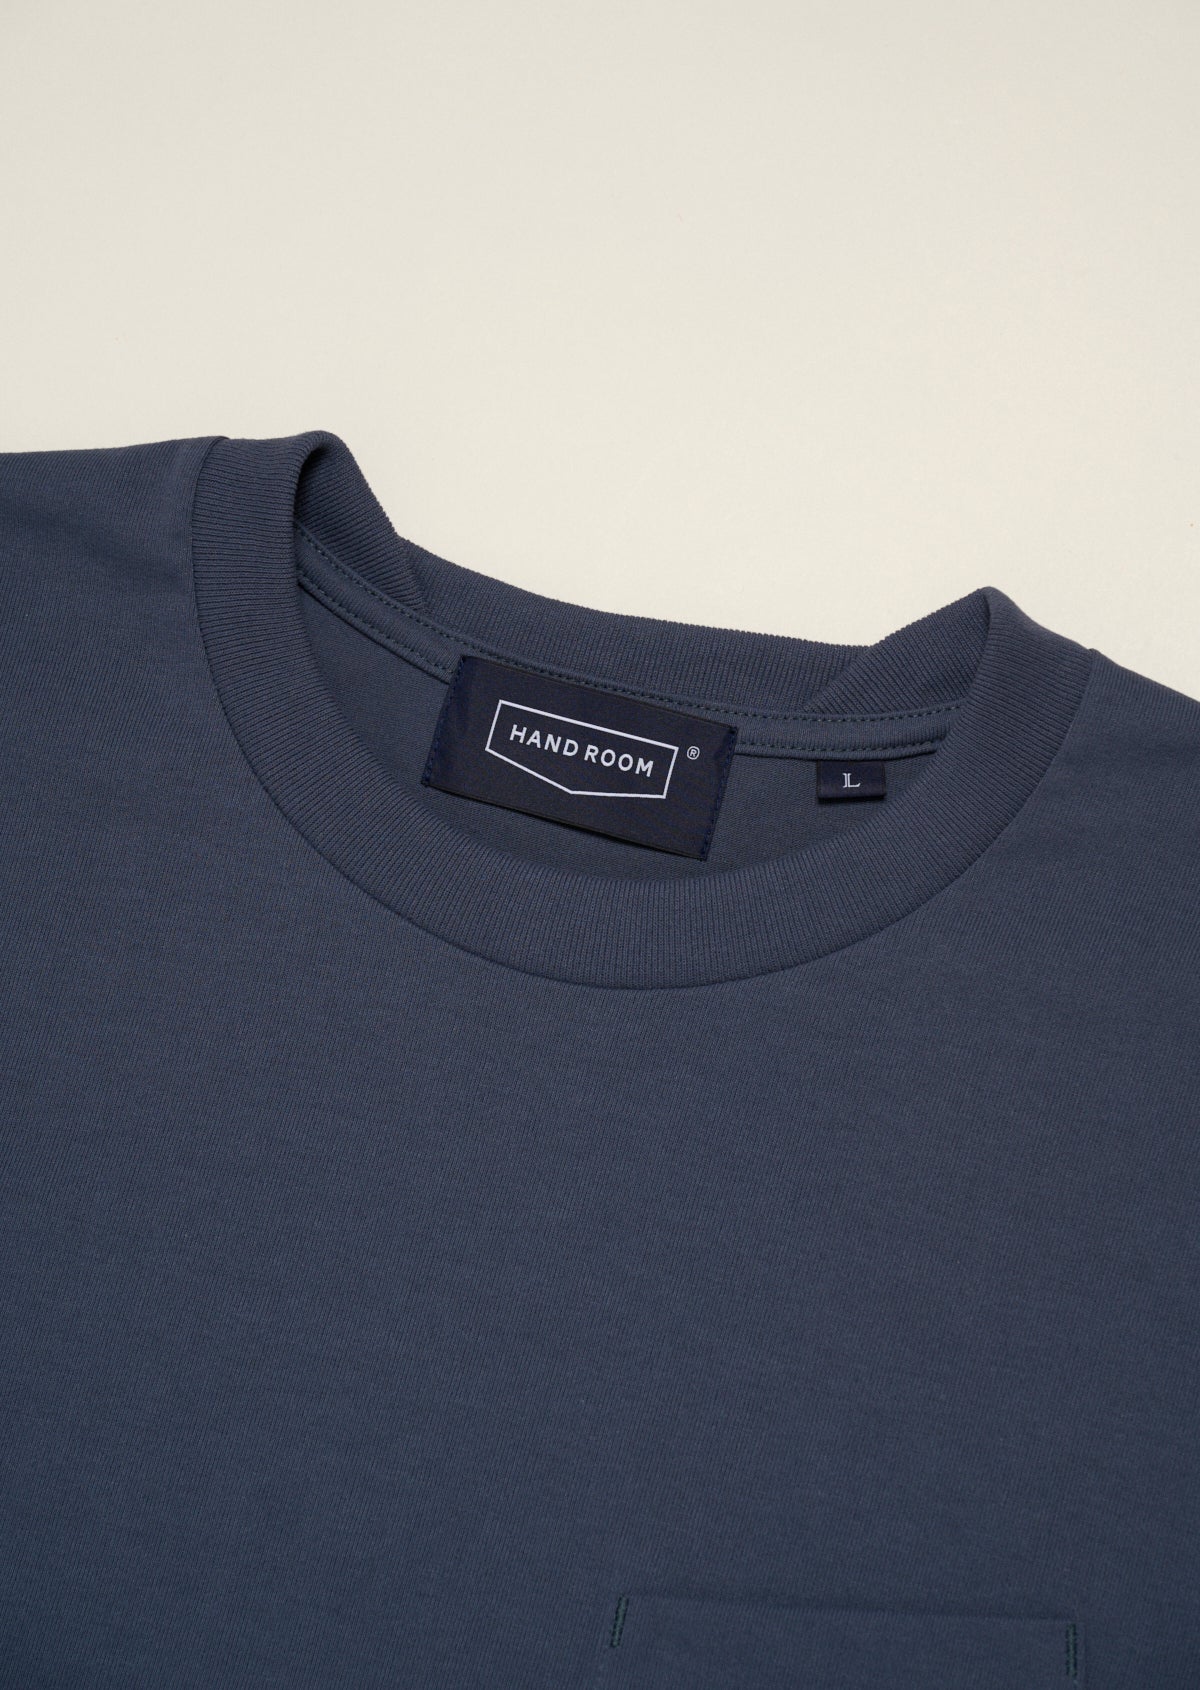 POLYESTER COTTON FEEL T-SHIRT CHARCOAL GRAY　8001-1702